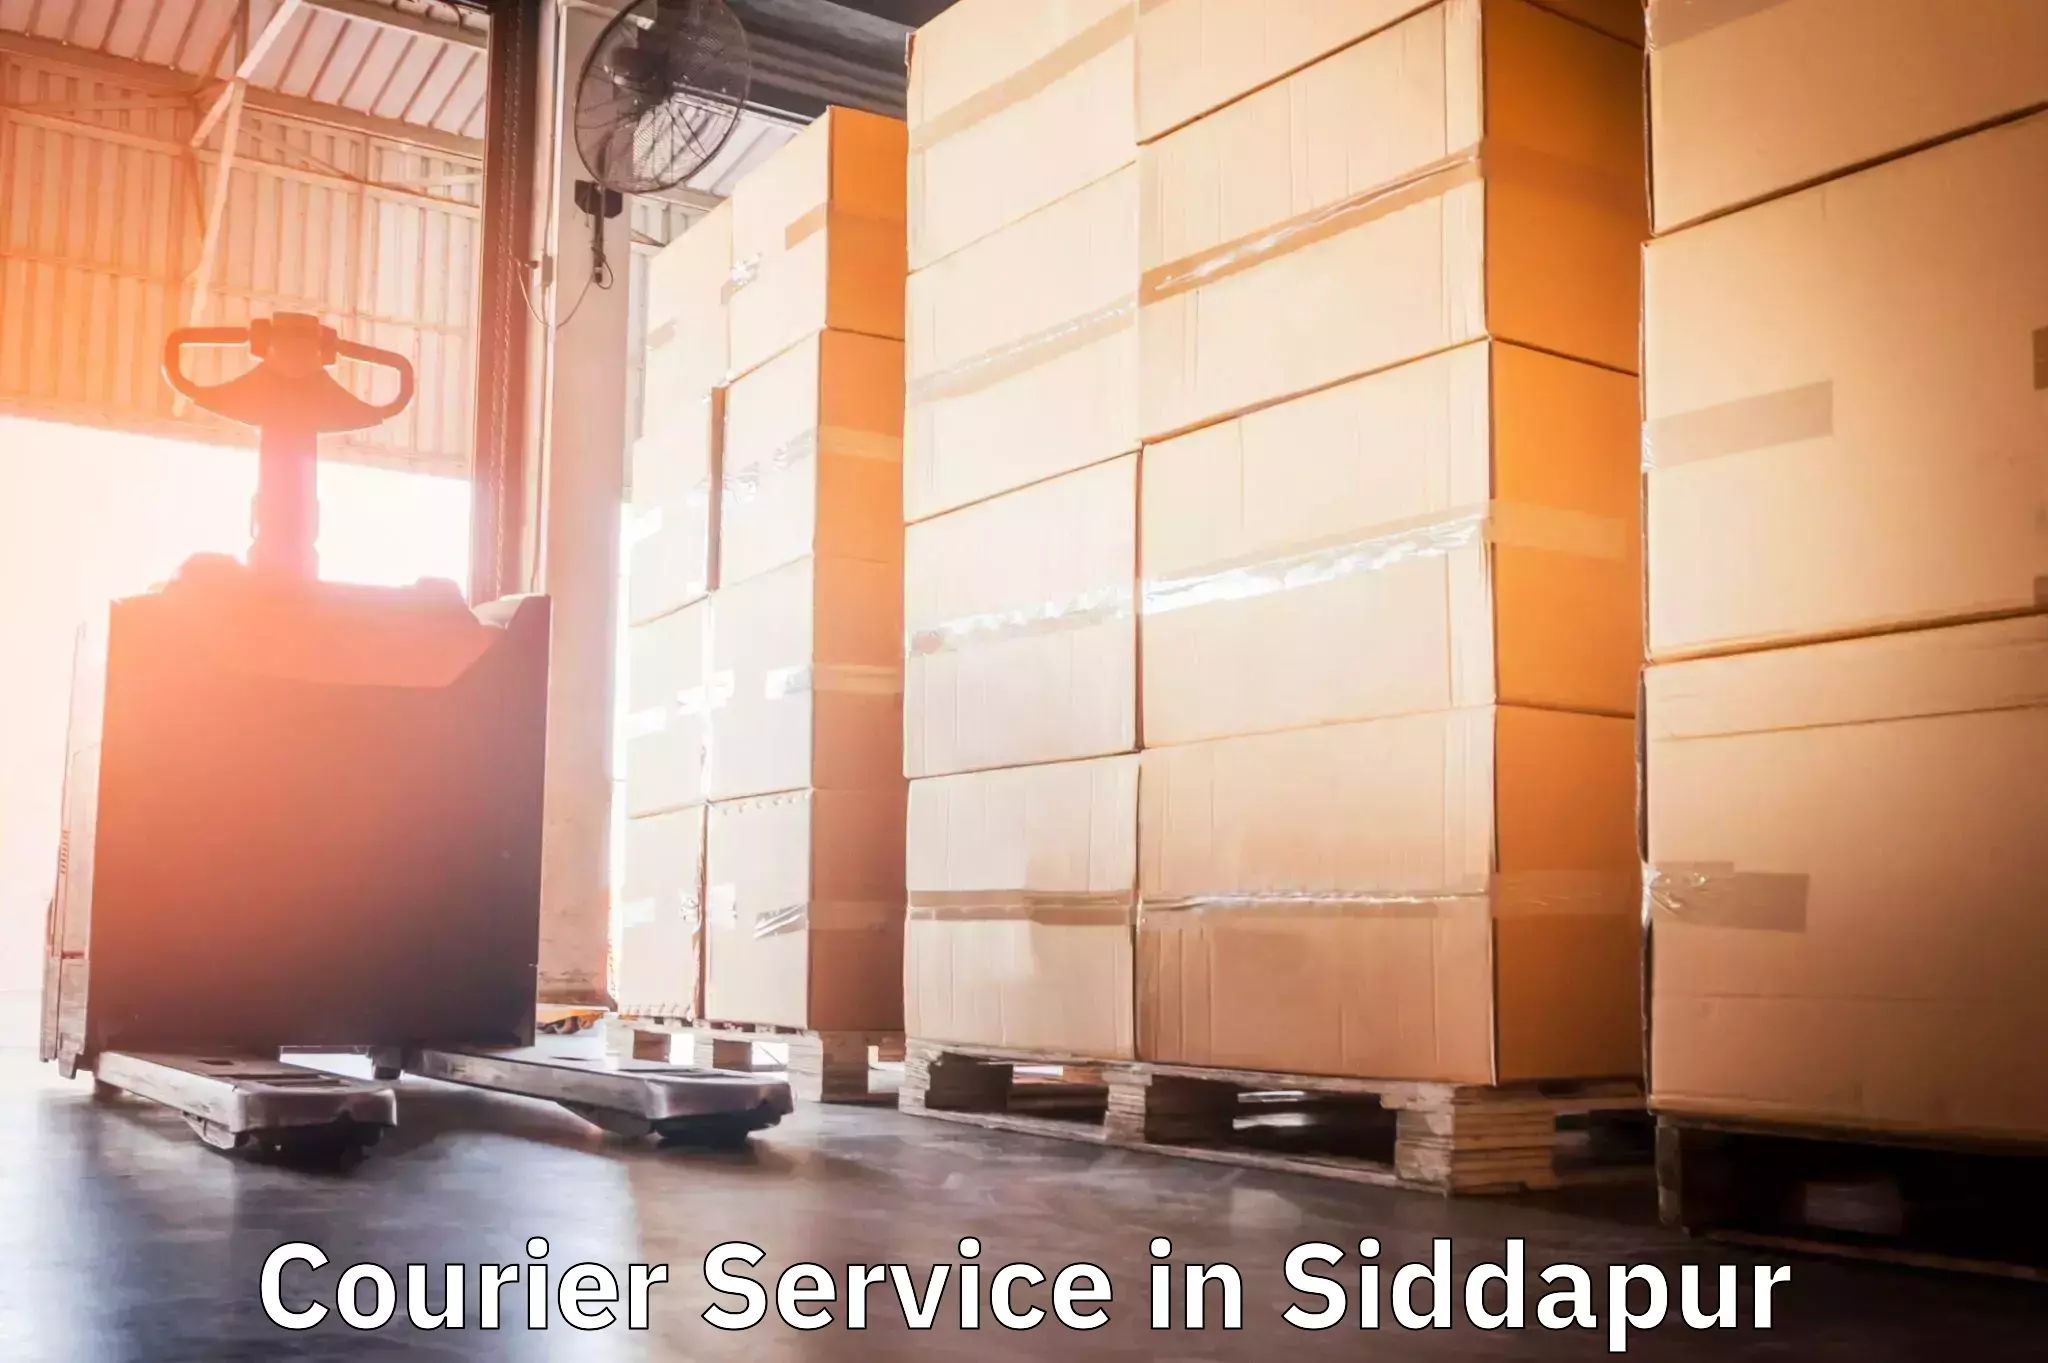 Multi-national courier services in Siddapur